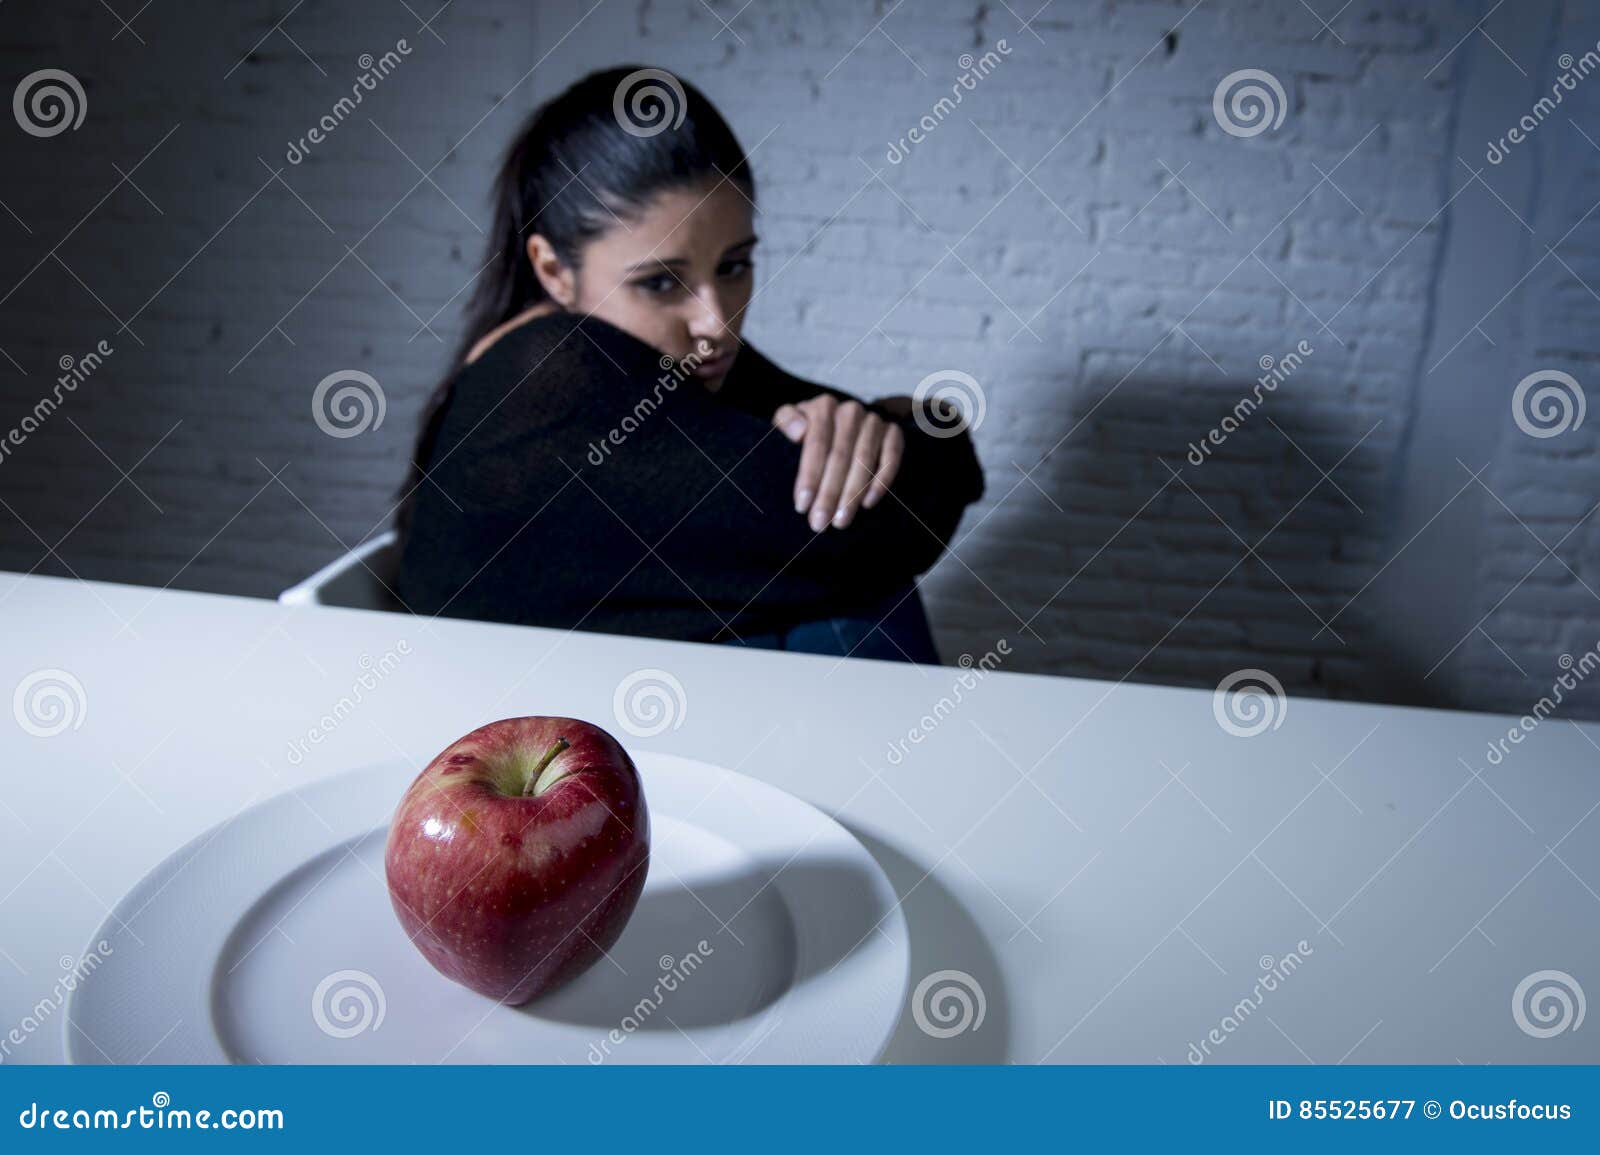 Young Woman or Teen Looking Apple Fruit on Dish As Symbol of Crazy Diet ...